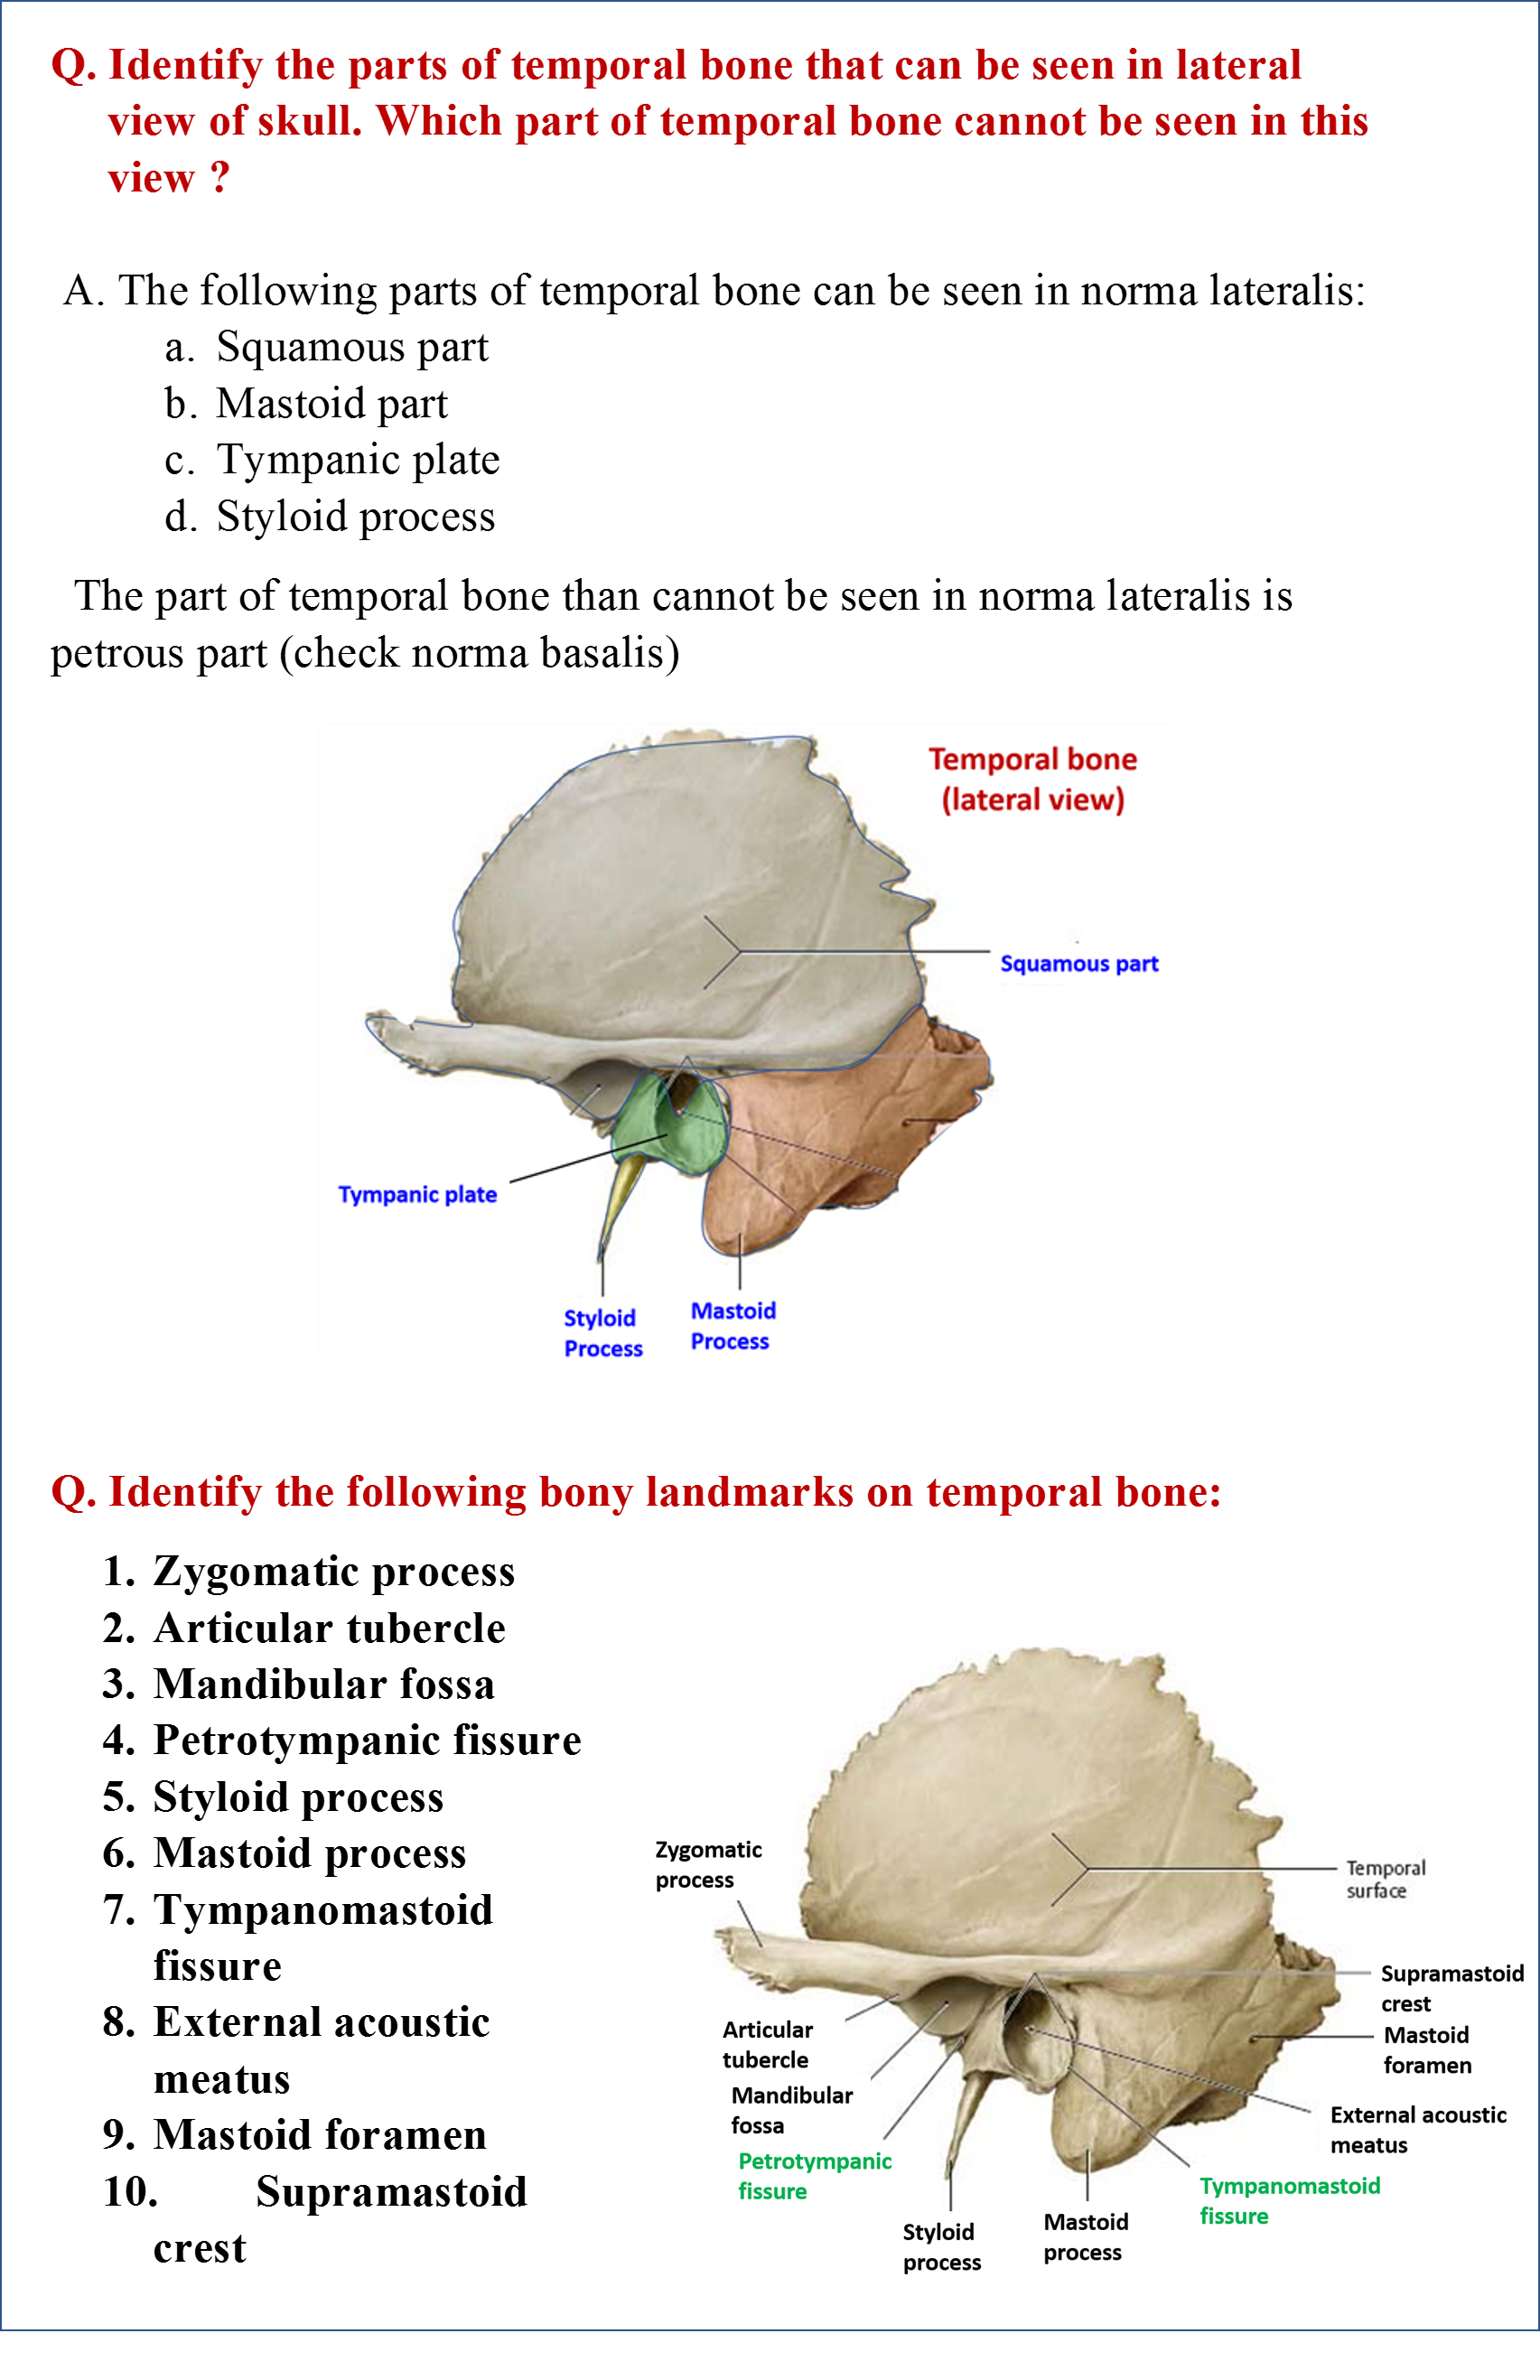 Parts of temporal bone and bony landmarks seen in norma lateralis